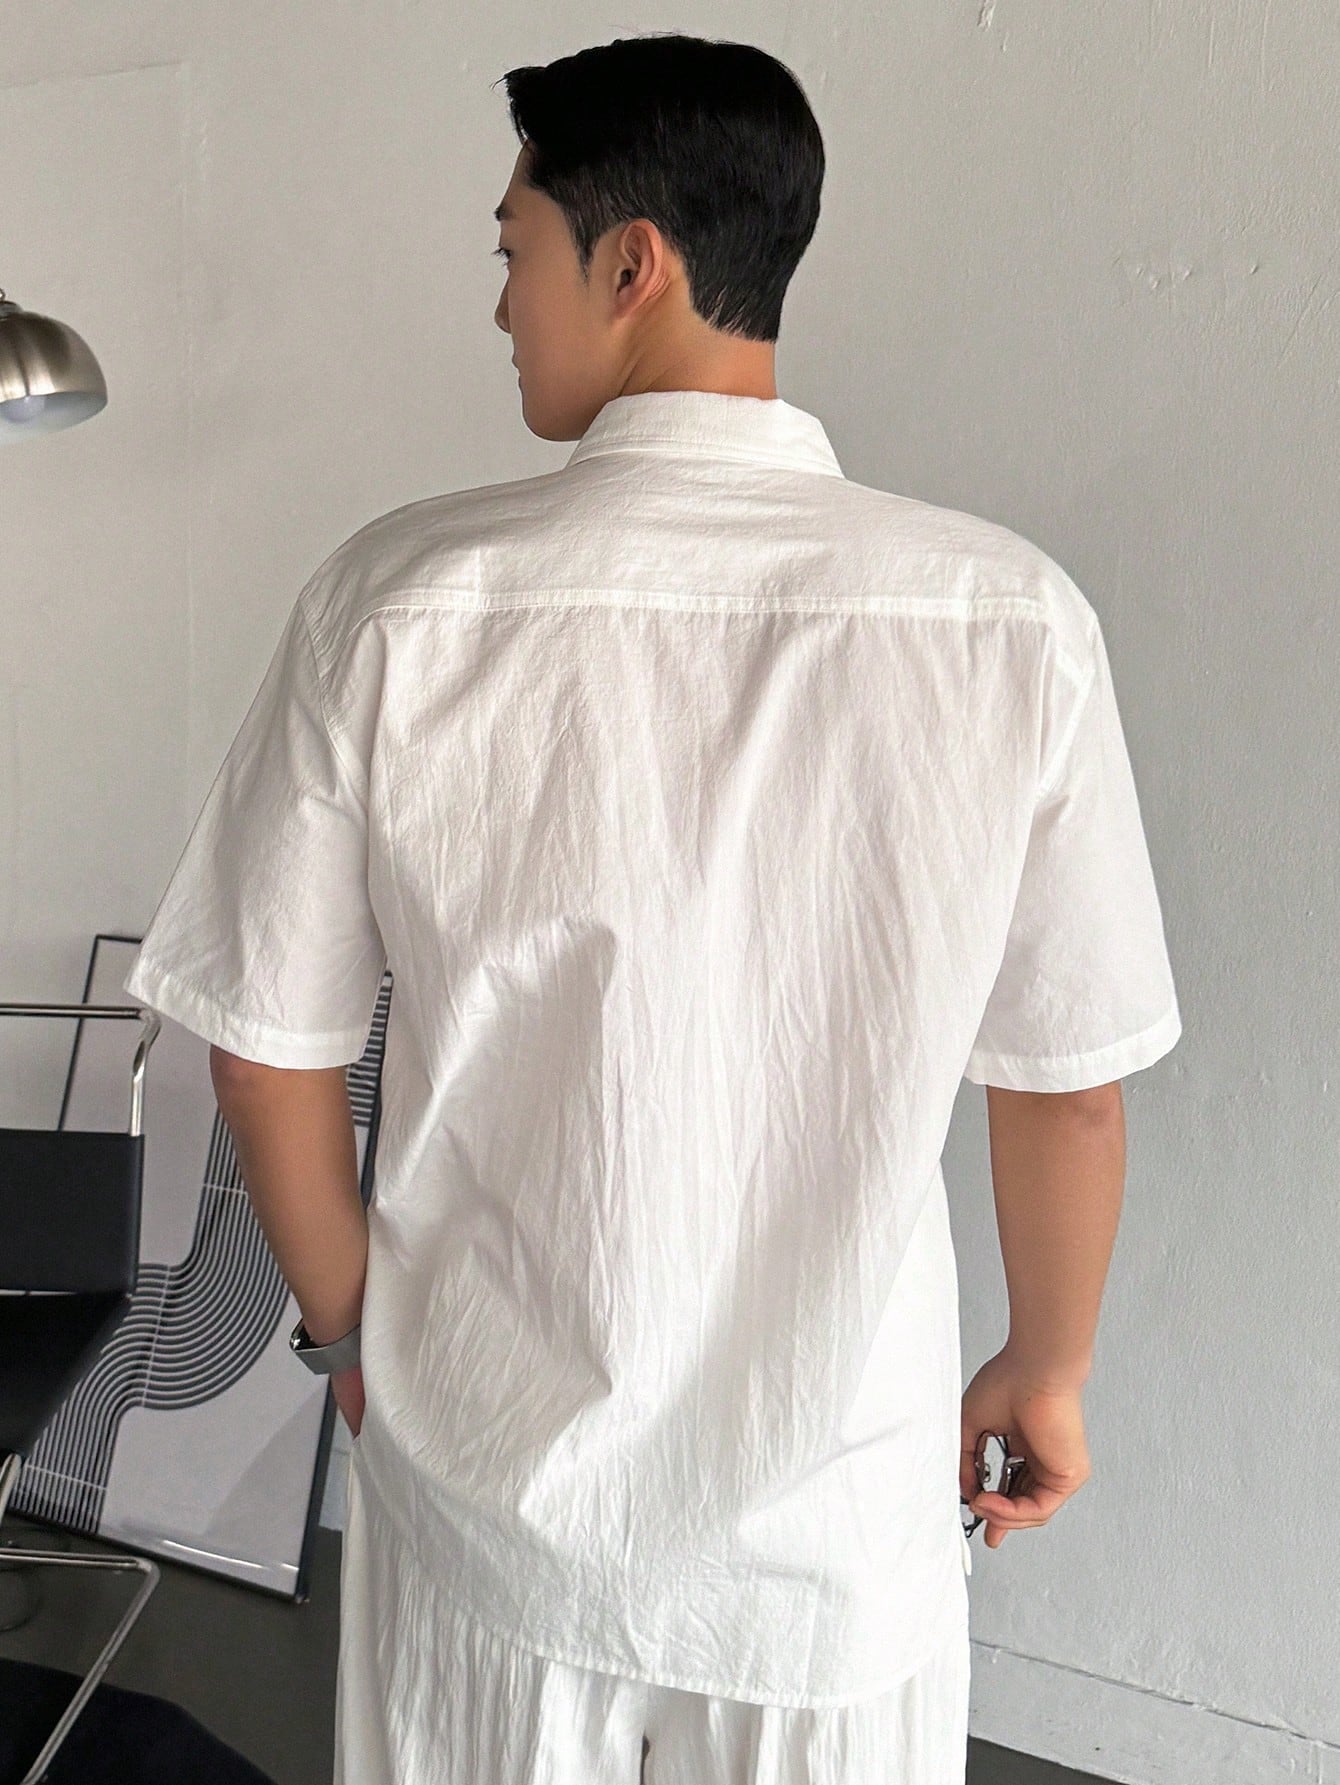 Men's Solid Single-Breasted Short Sleeve Shirt For Summer